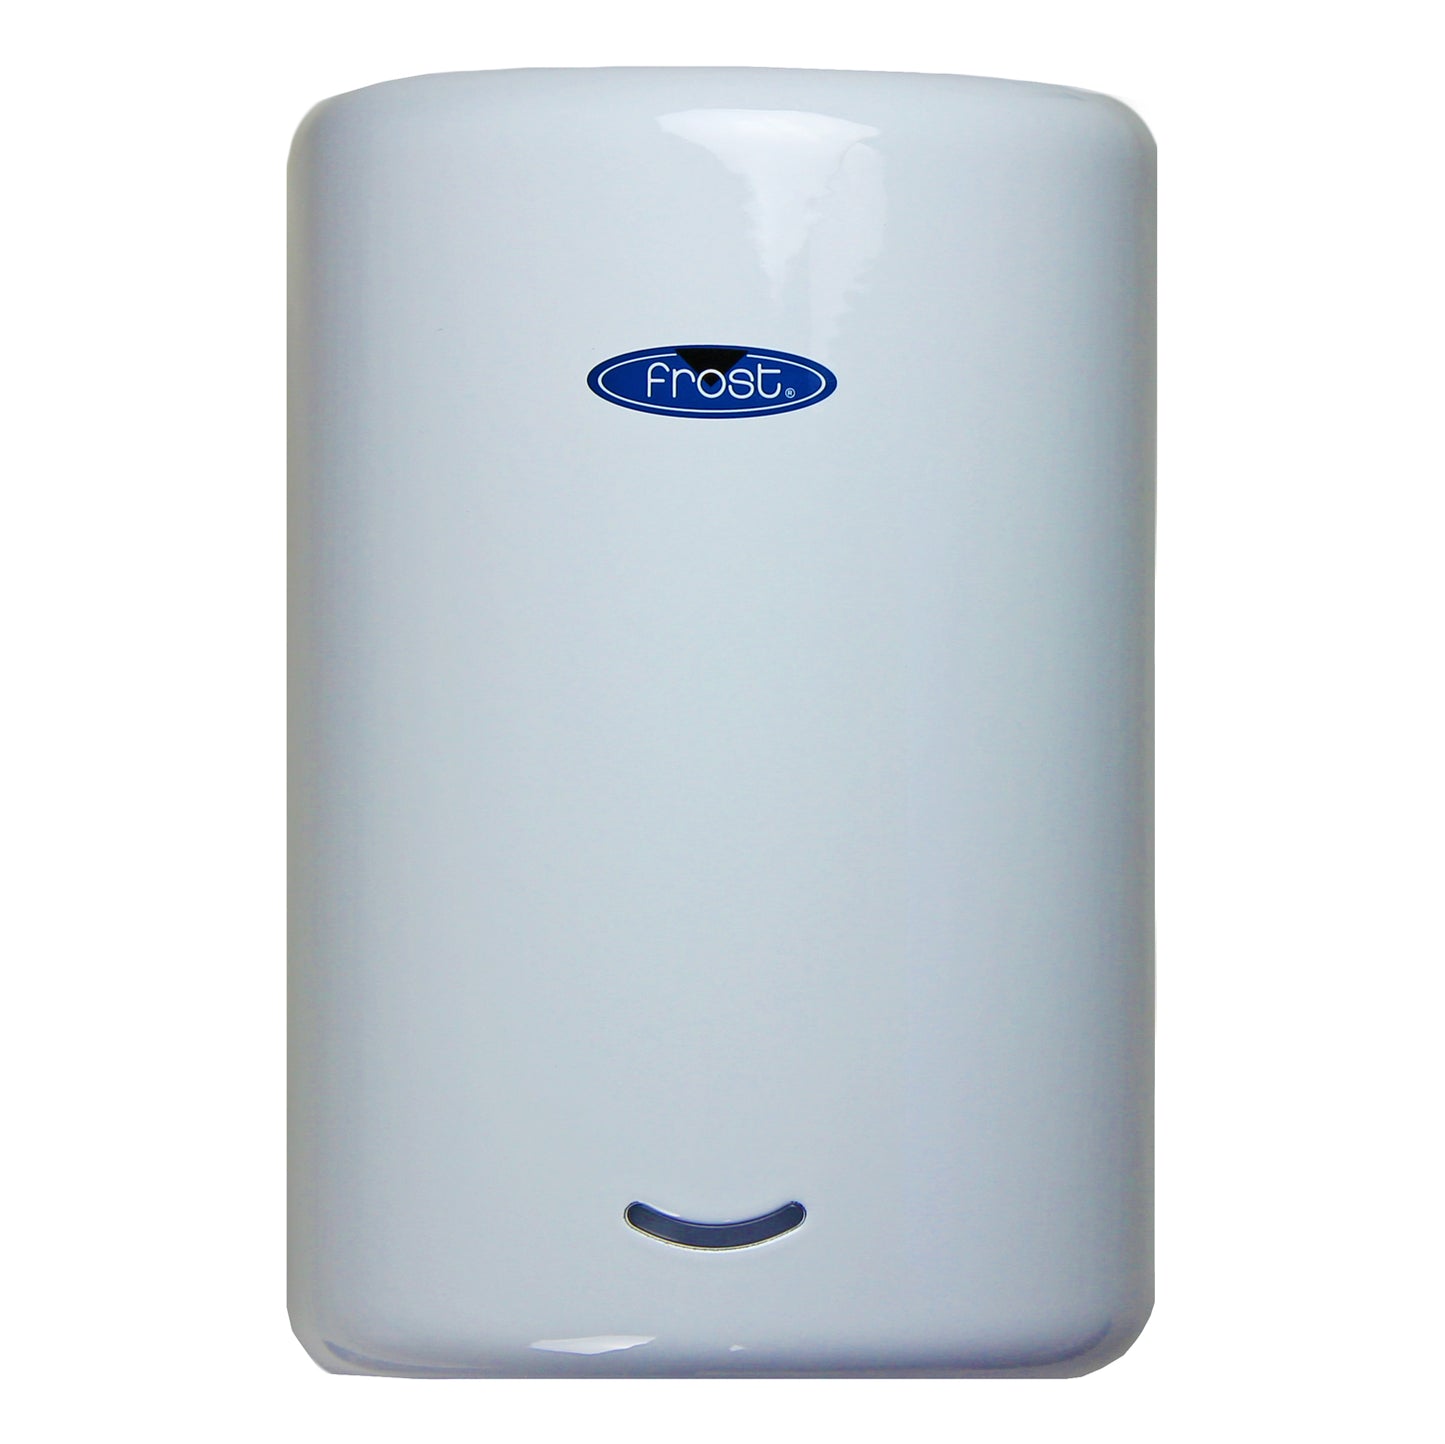 Frost hand dryer blue white front 